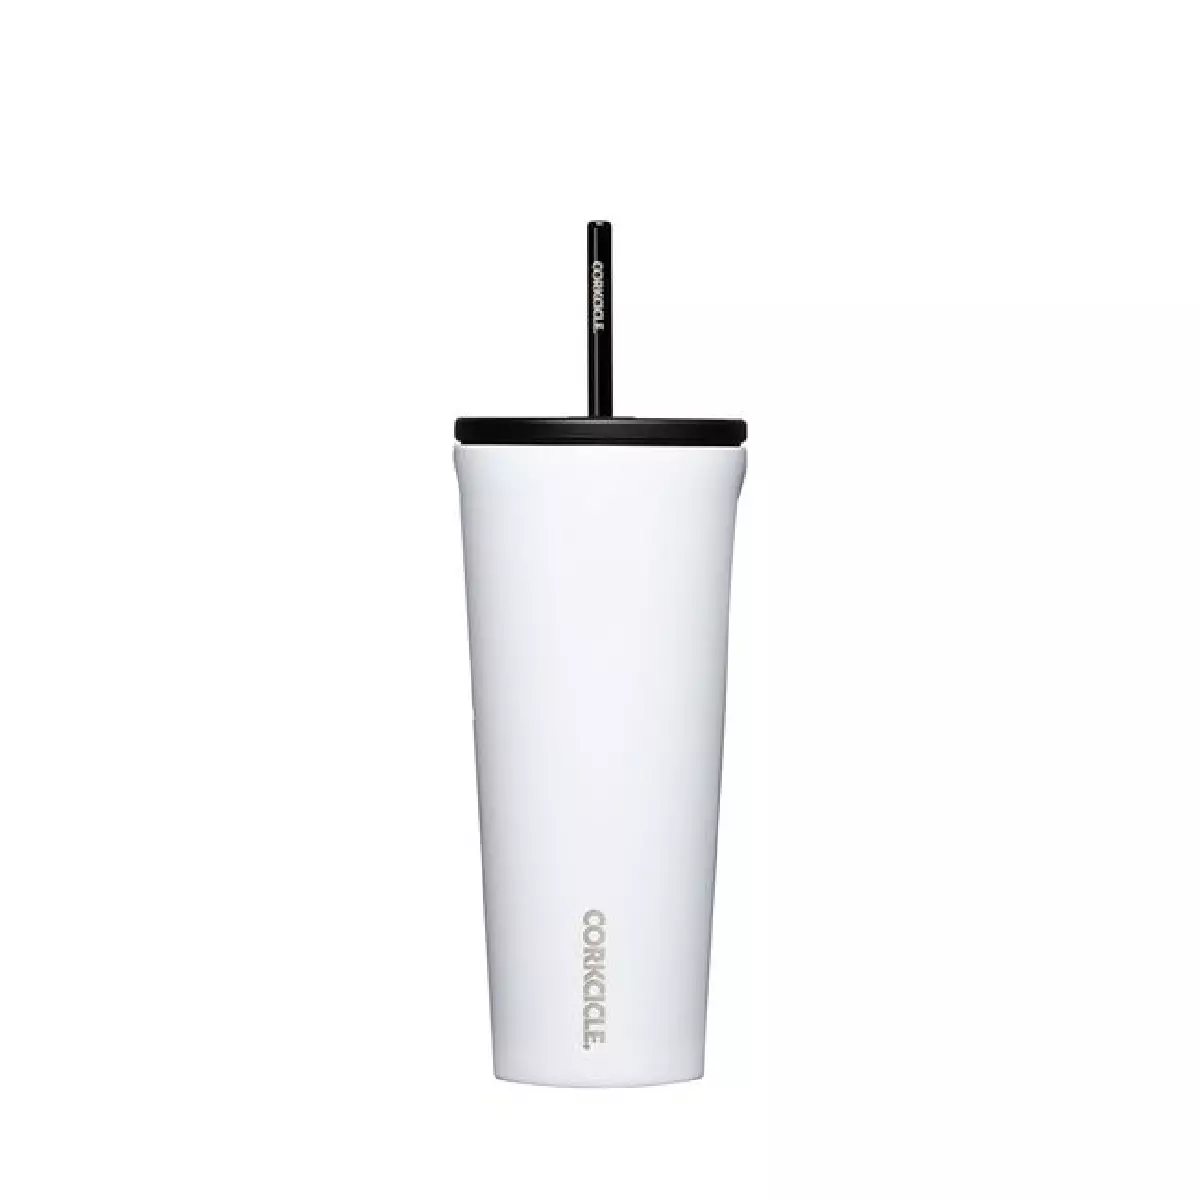 Corkcicle cold cup 24 oz gloss white – Osborn Drugs, Inc.